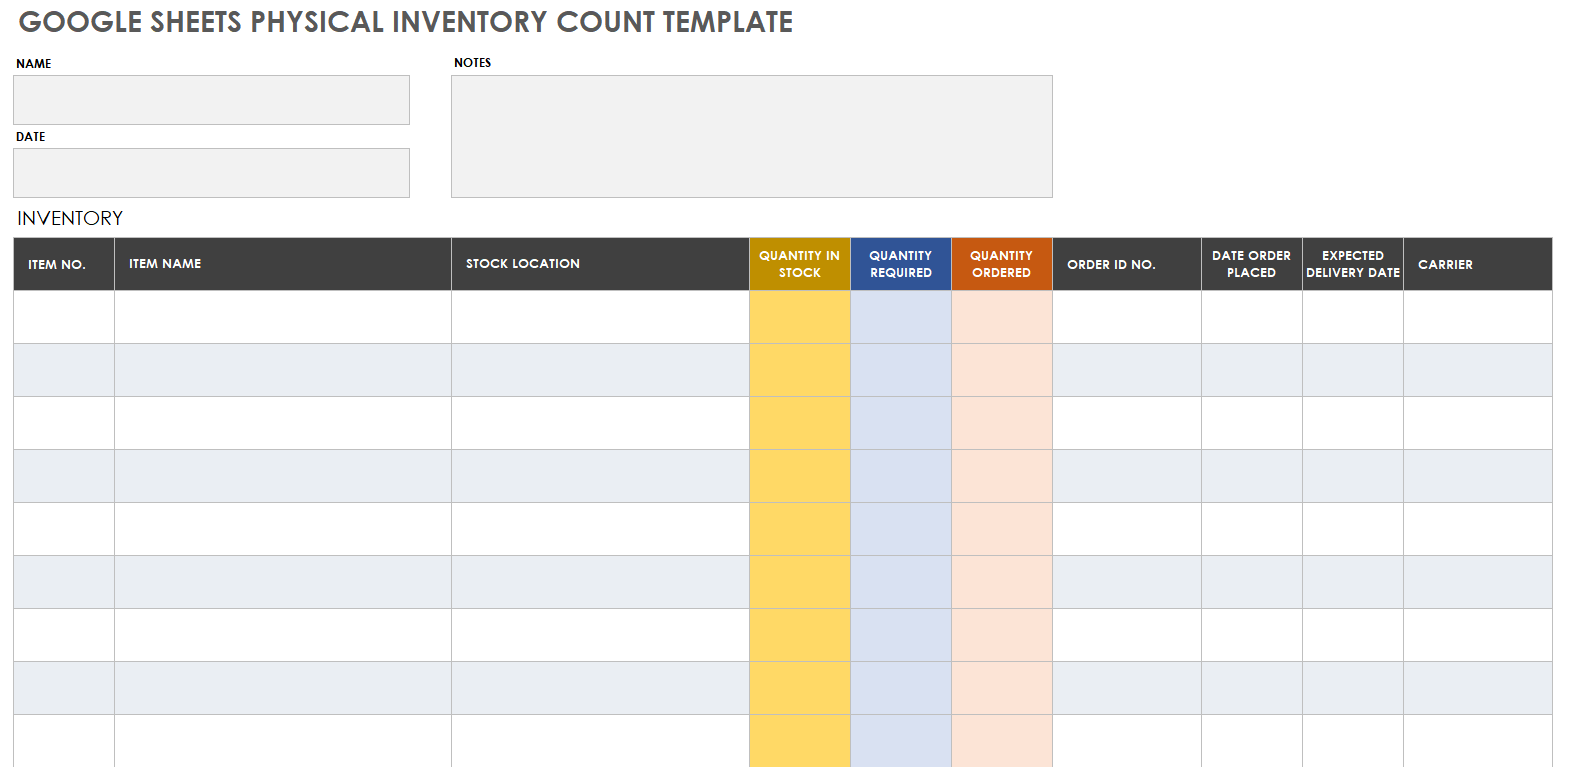 Google Sheets Physical Inventory Count Template